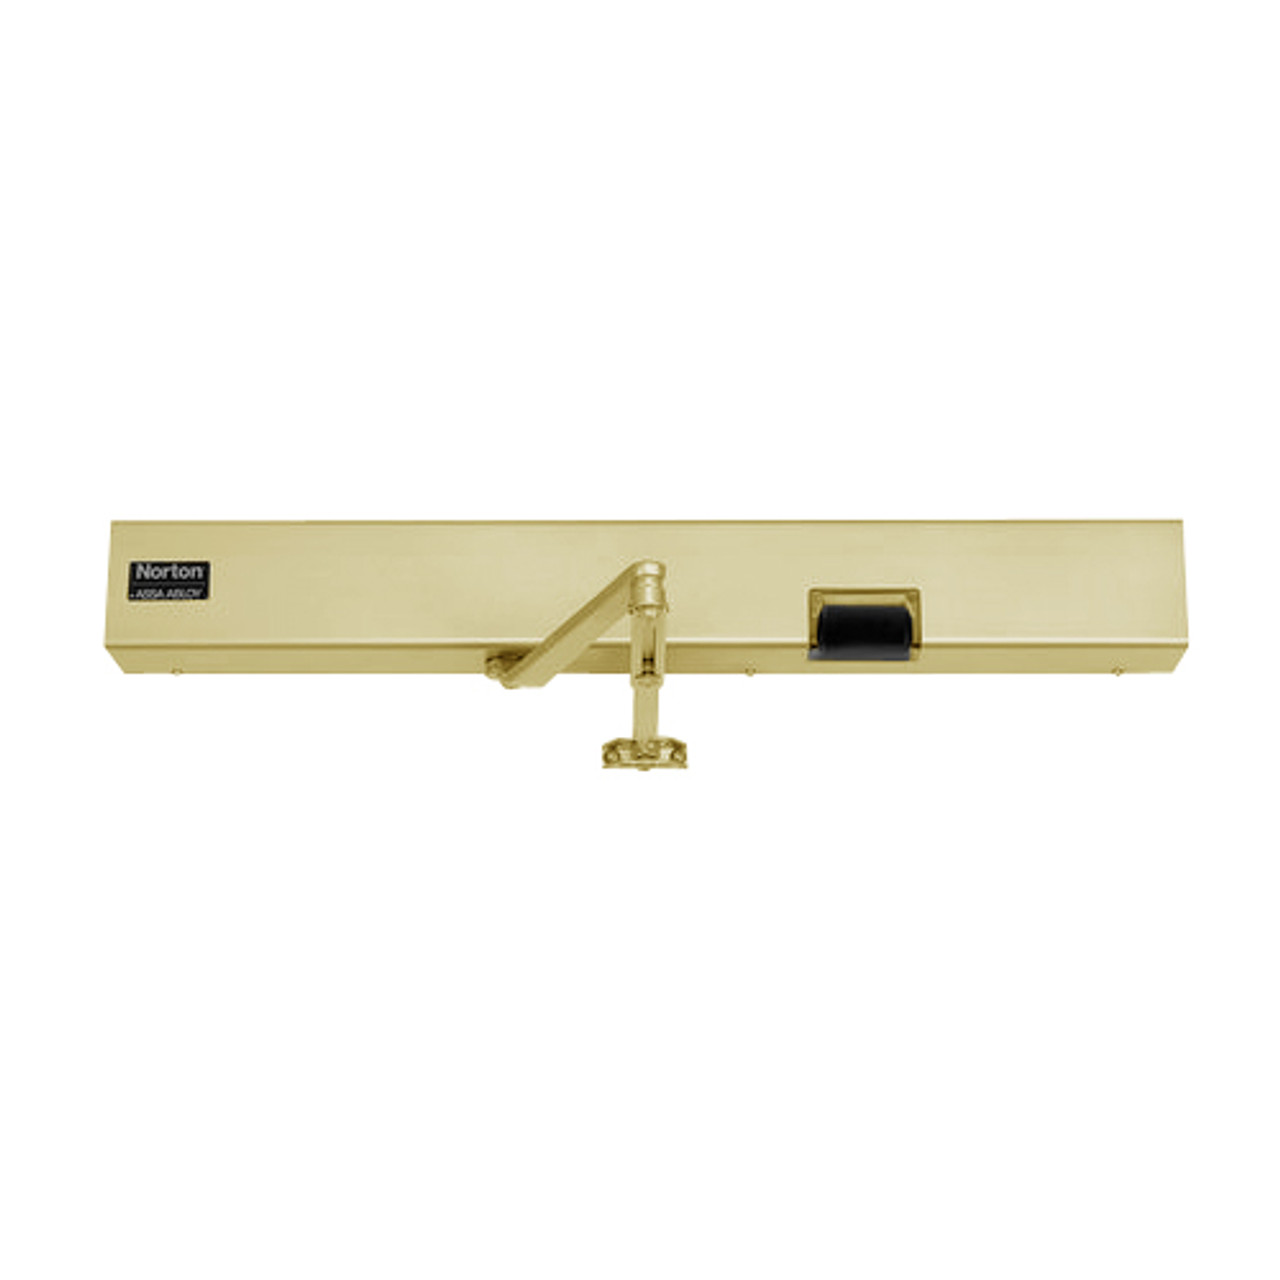 7132SZ-LH-120VAC-696 Norton 7100SZ Series Safe Zone Multi-Point Closer/Holder with Motion Sensor and Push Side Double Lever 13-1/2 inch Main Arm in Gold Finish